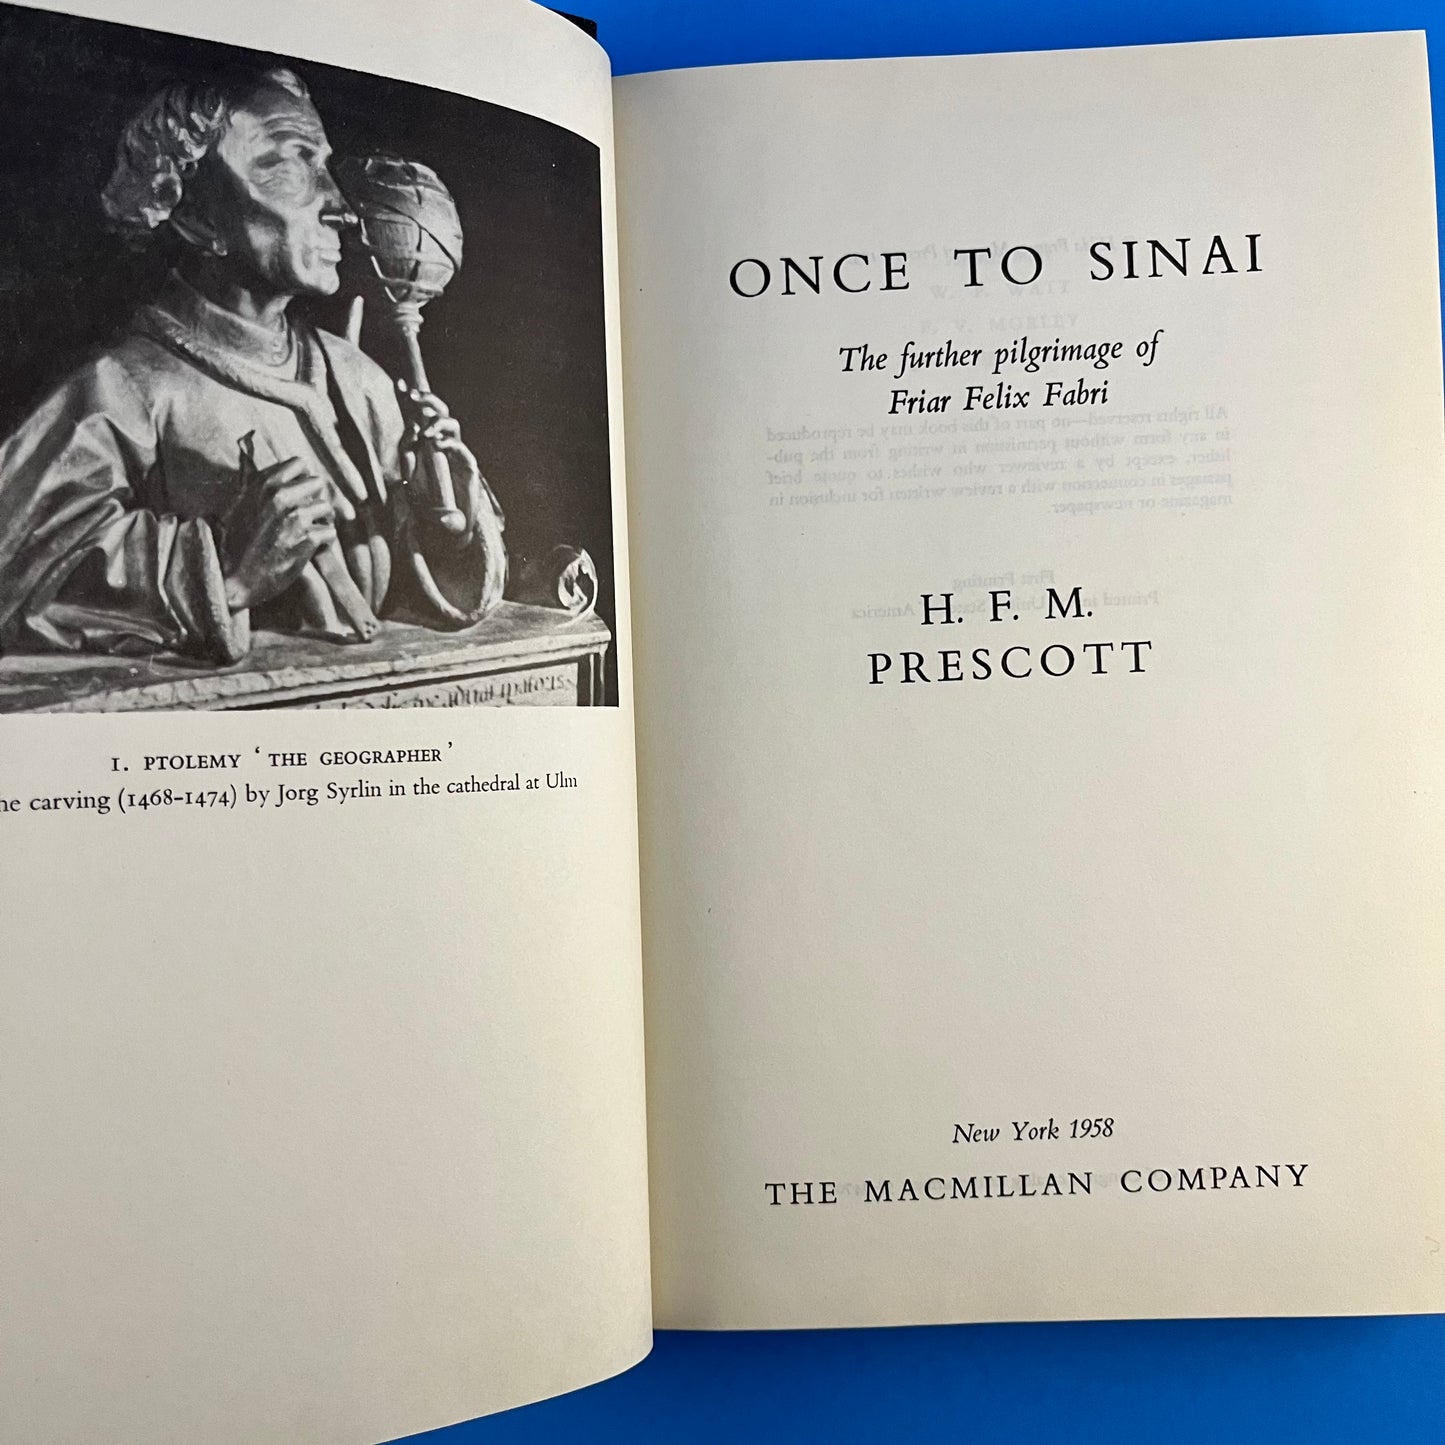 Once to Sinai: The Further Pilgrimage of Friar Felix Fabri